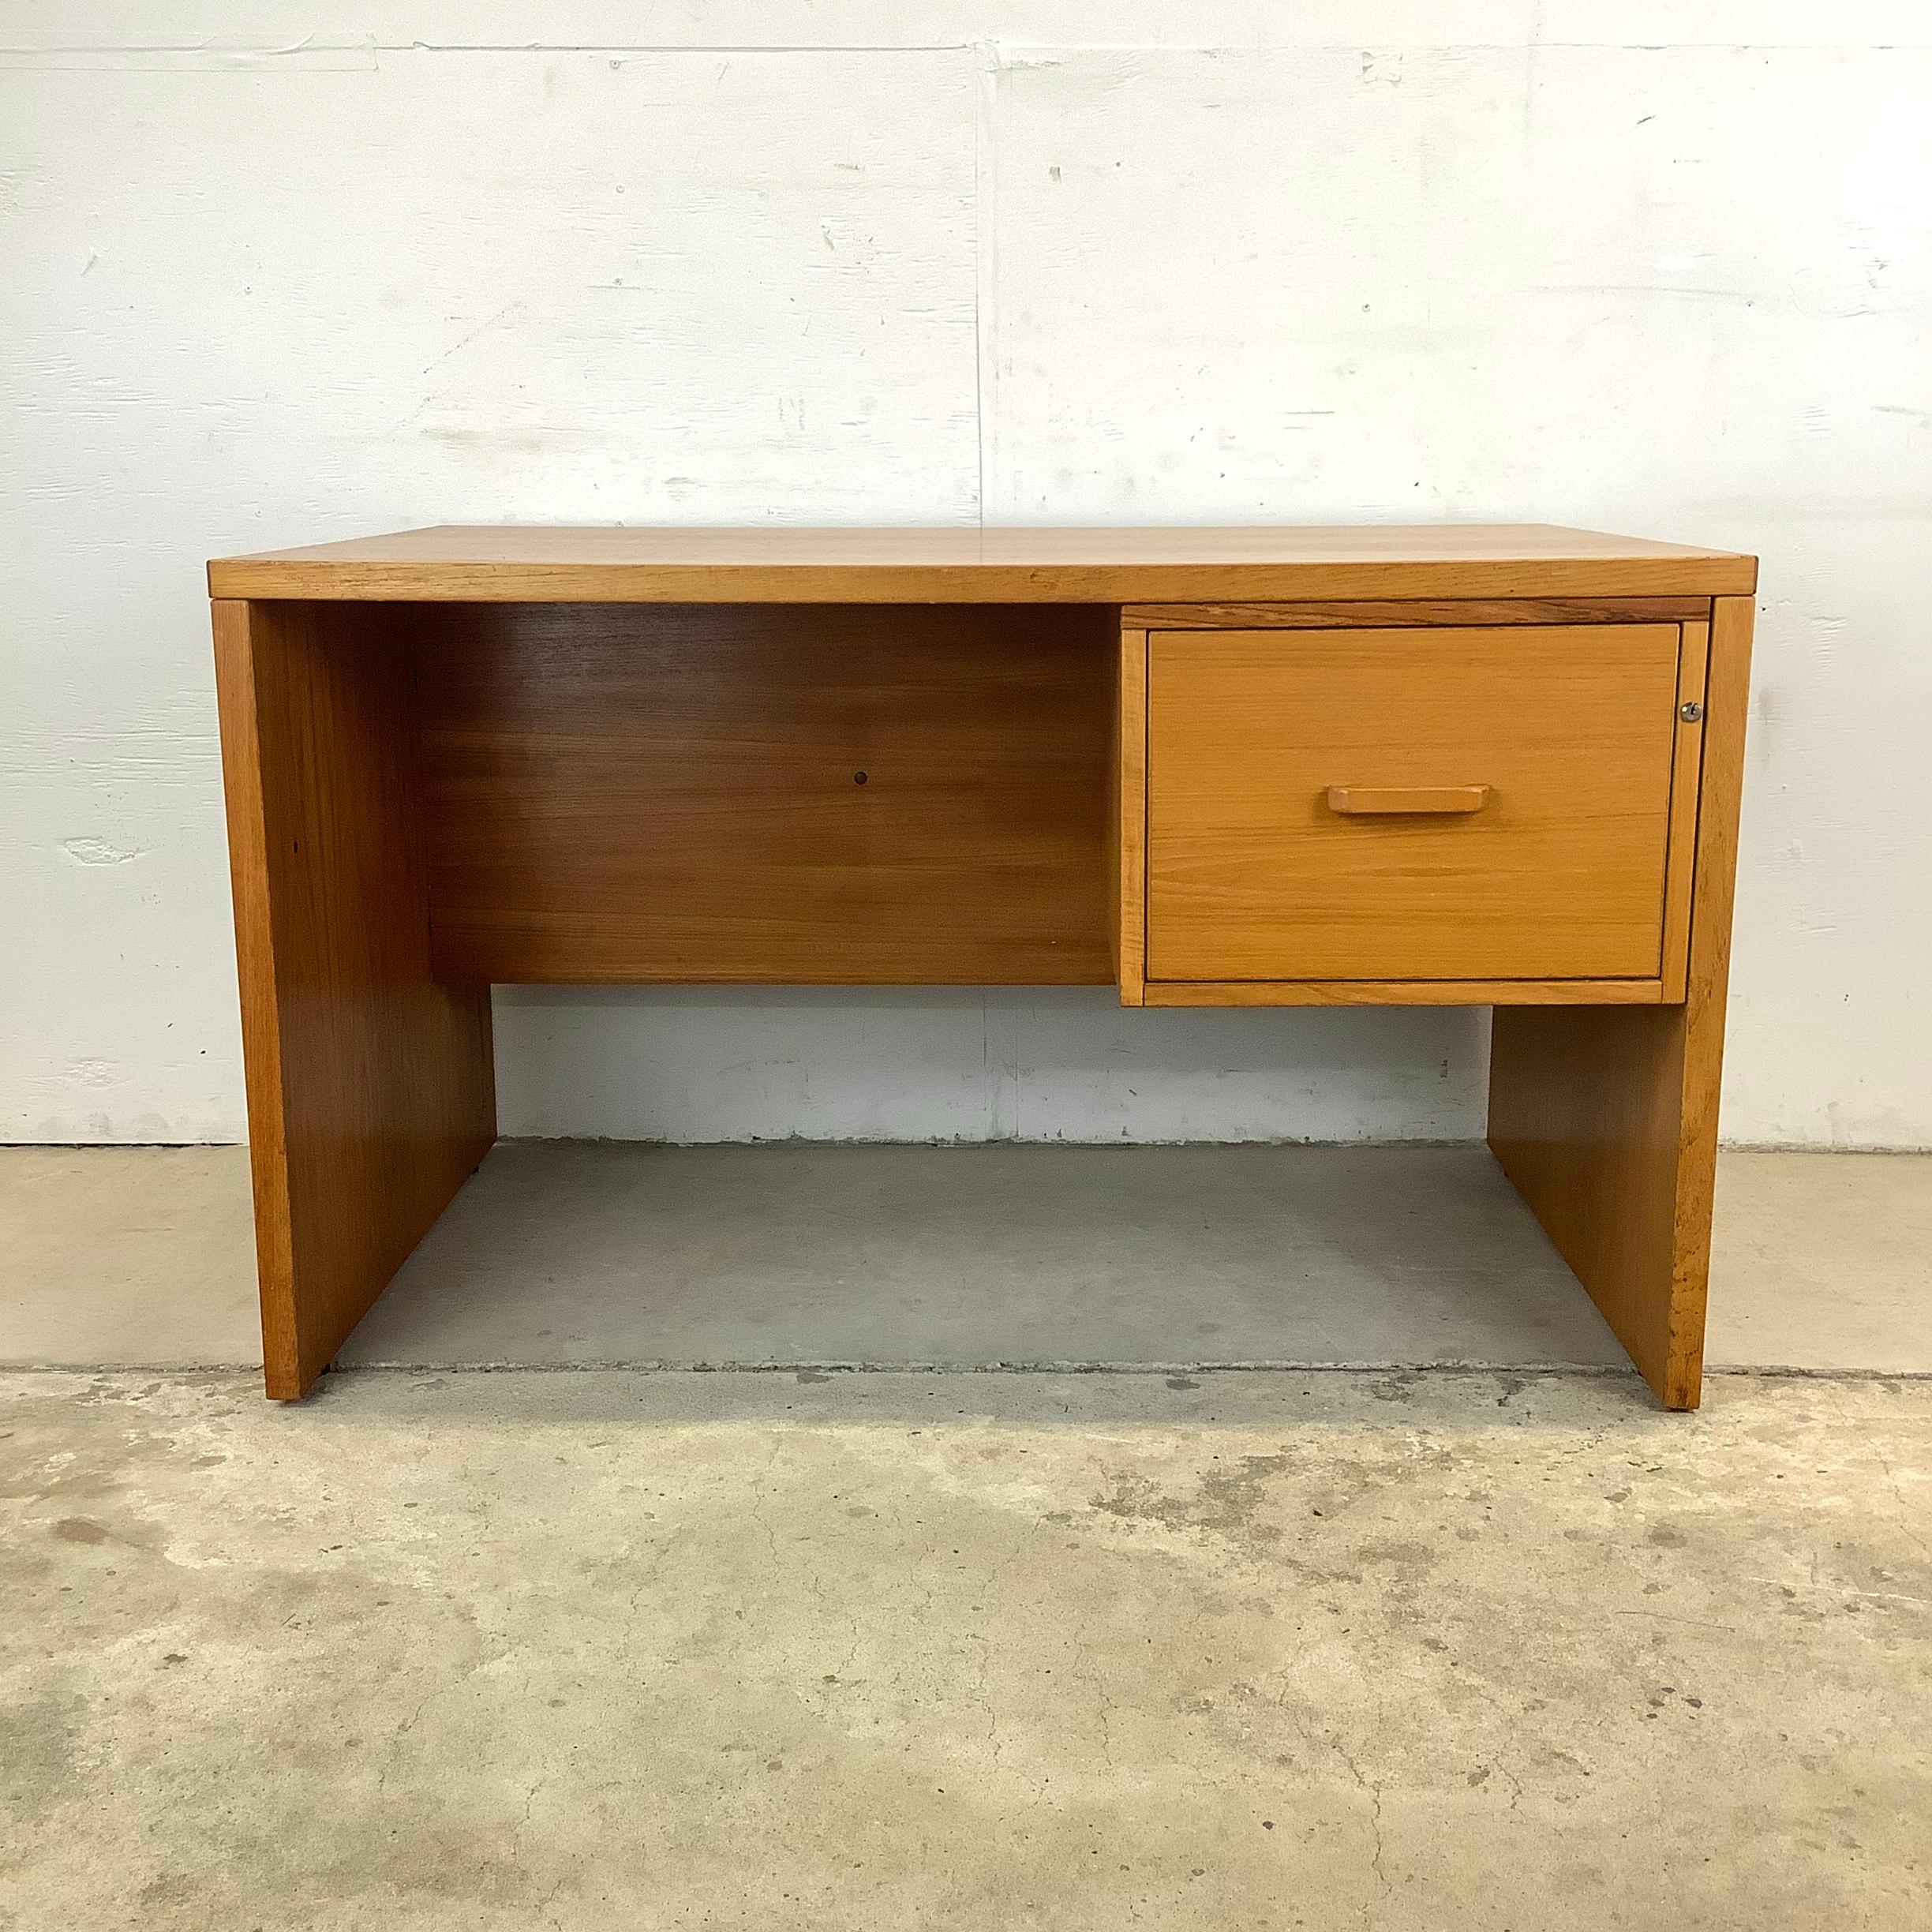 Introducing an exceptional vintage centerpiece for your workspace – this Scandinavian Modern Teak Desk. Drawing inspiration from iconic mid-century Danish design, this desk embodies the essence of Scandinavian style, blending simple elegance with